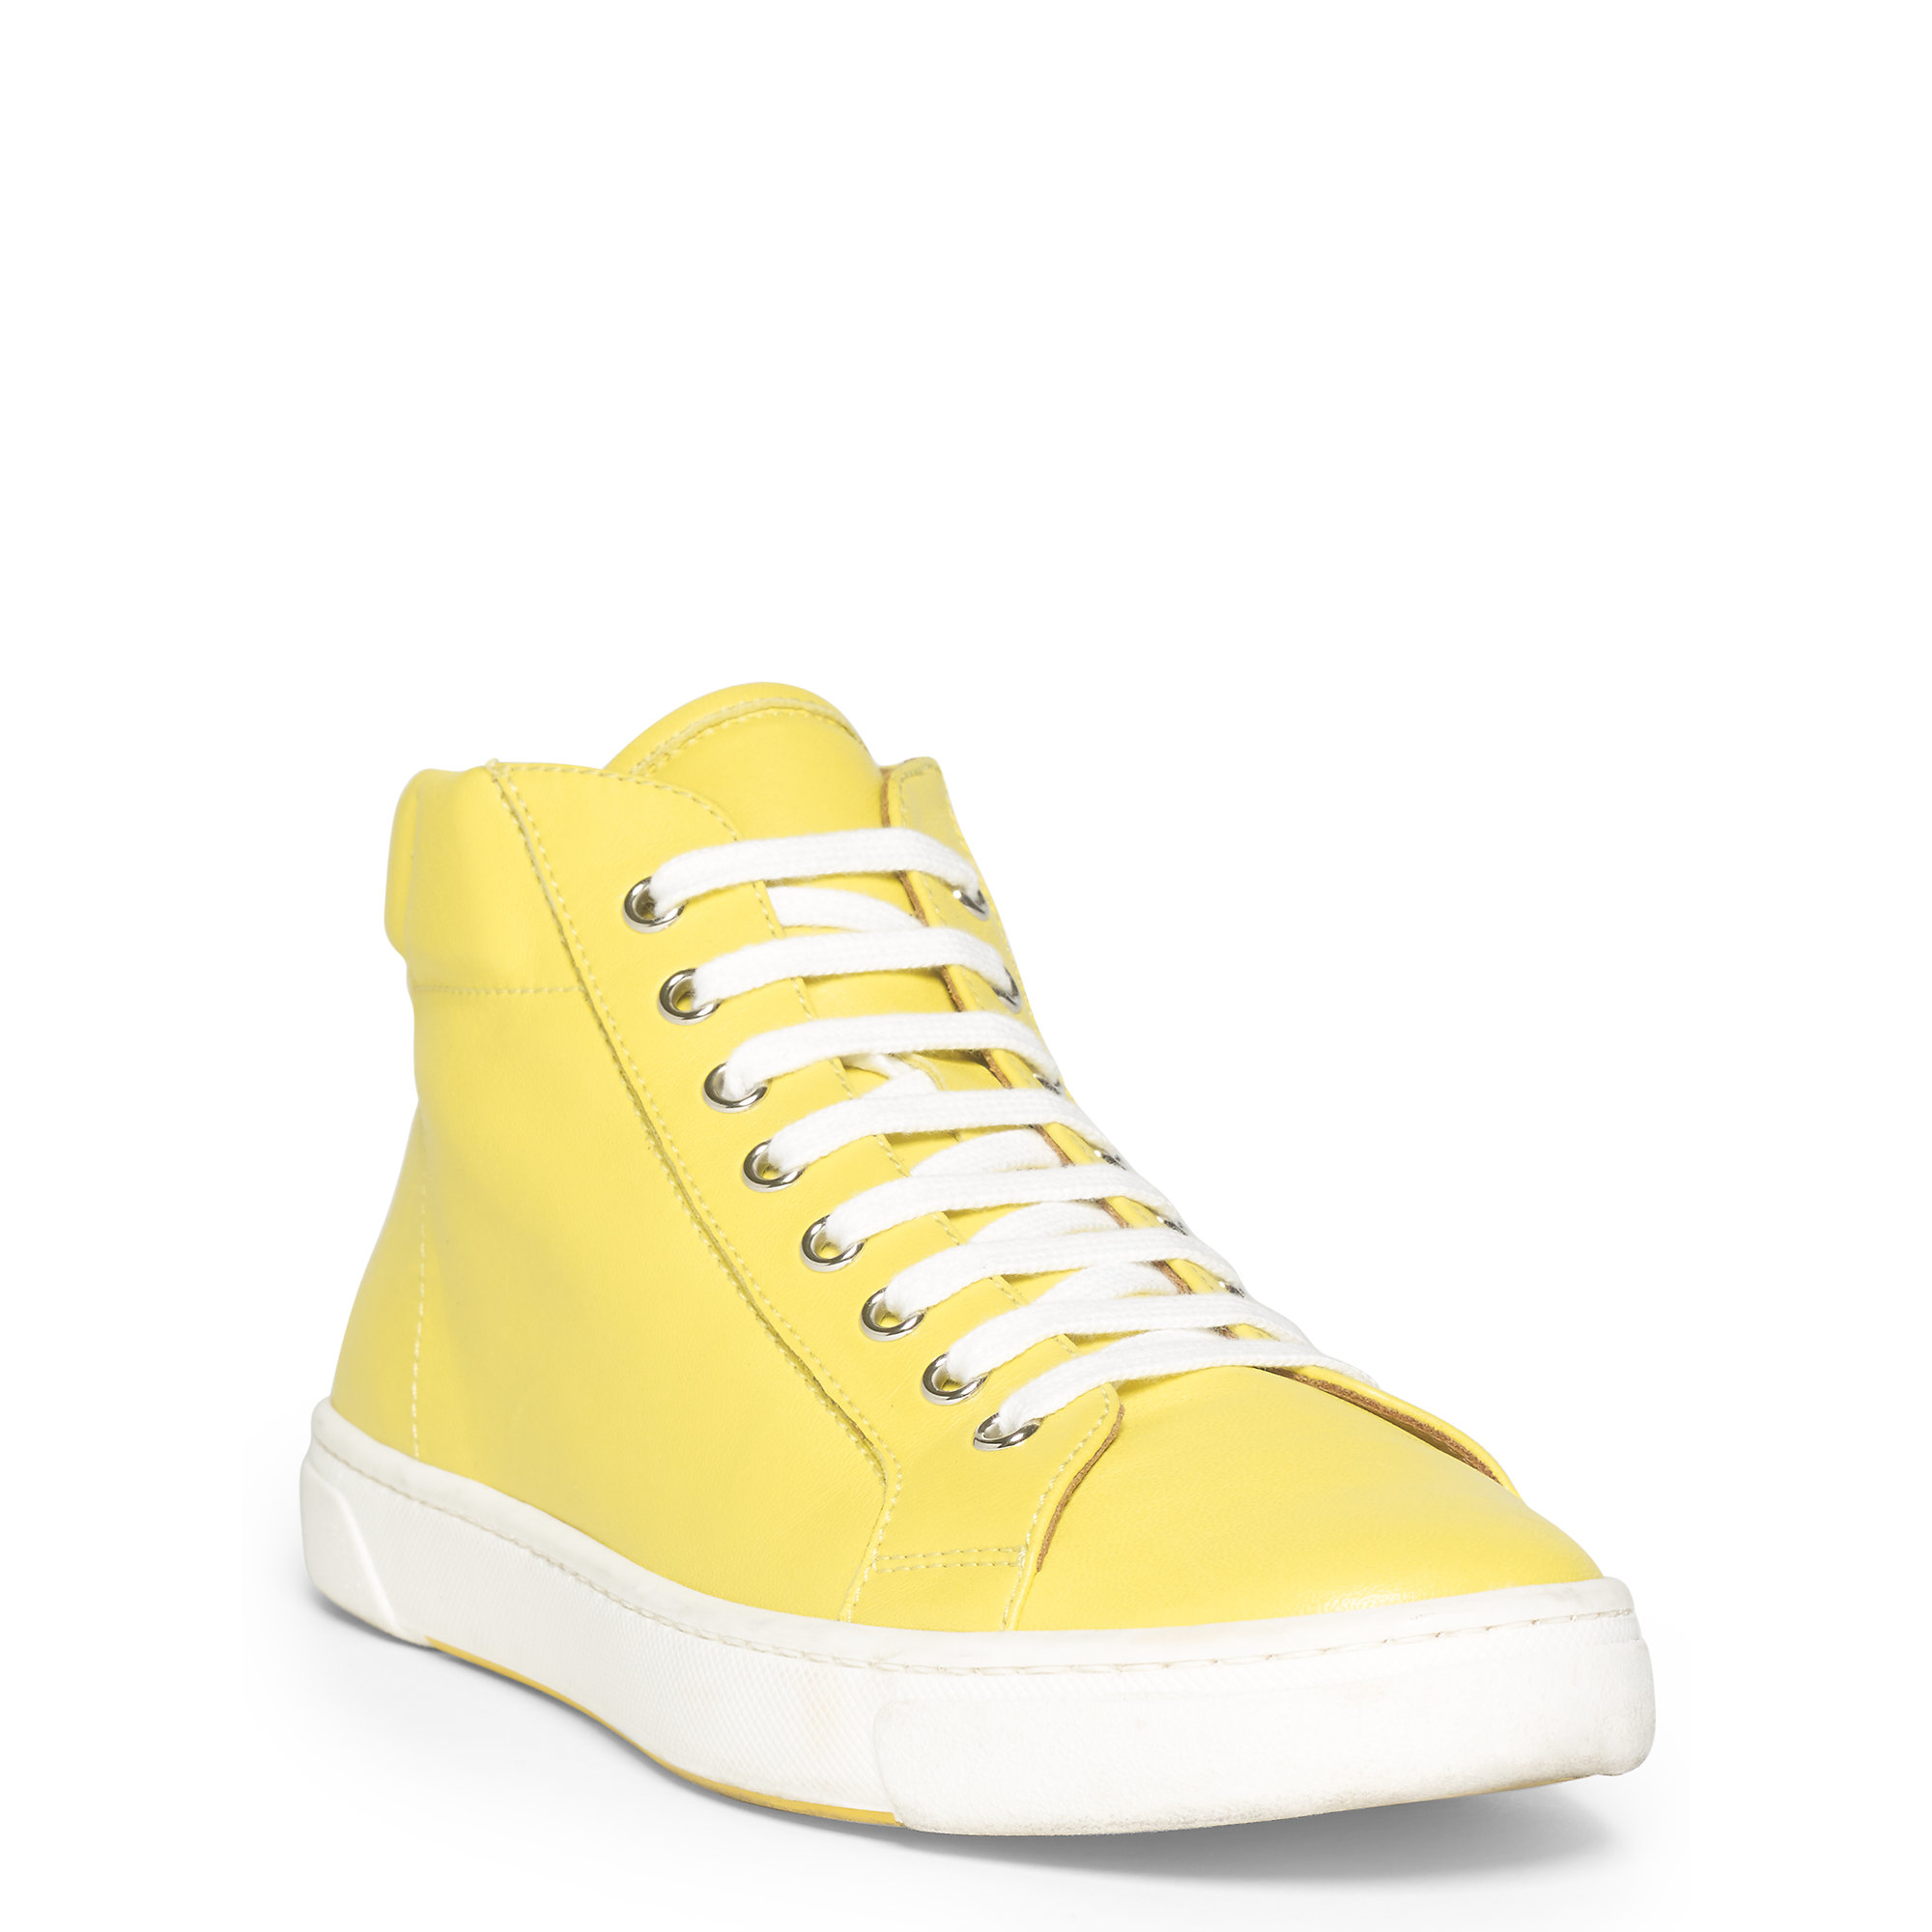 Lyst - Polo Ralph Lauren Leather High-top Sneaker in Yellow